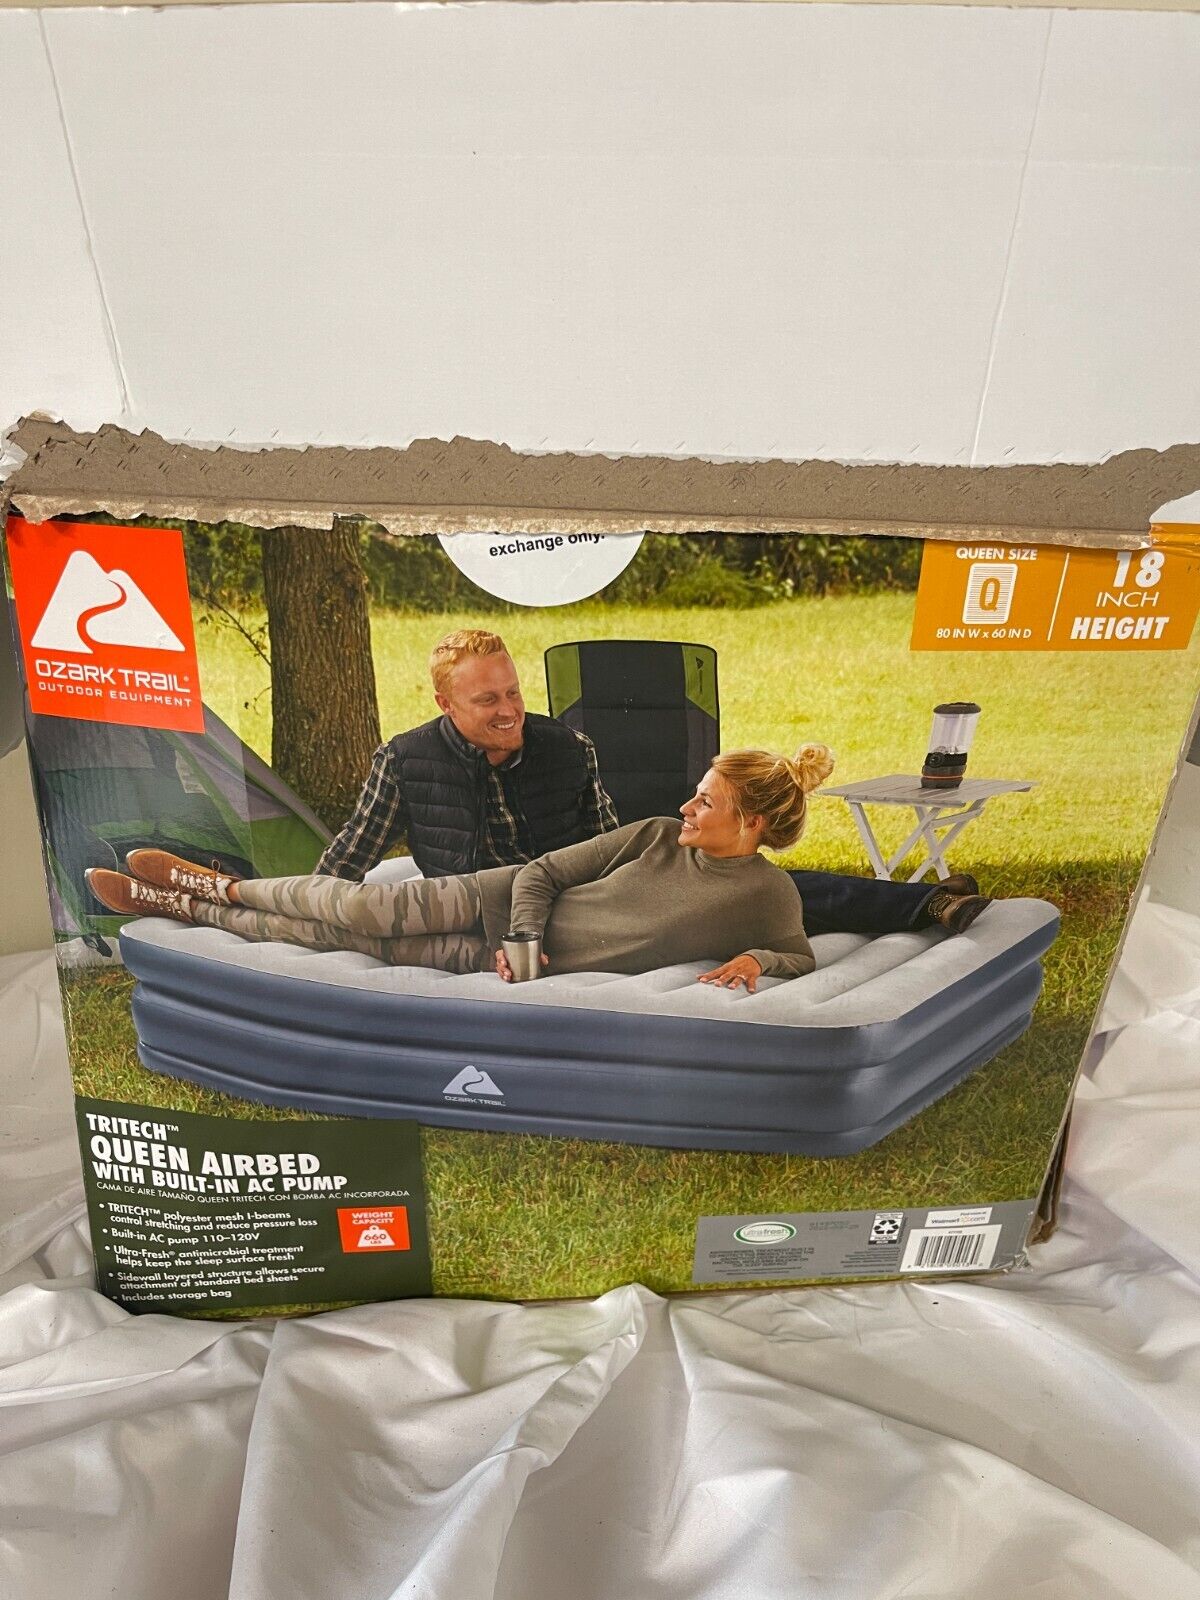 Queen Air Bed with Built In AC Pump (Ozark Trail) 18 Inch Height